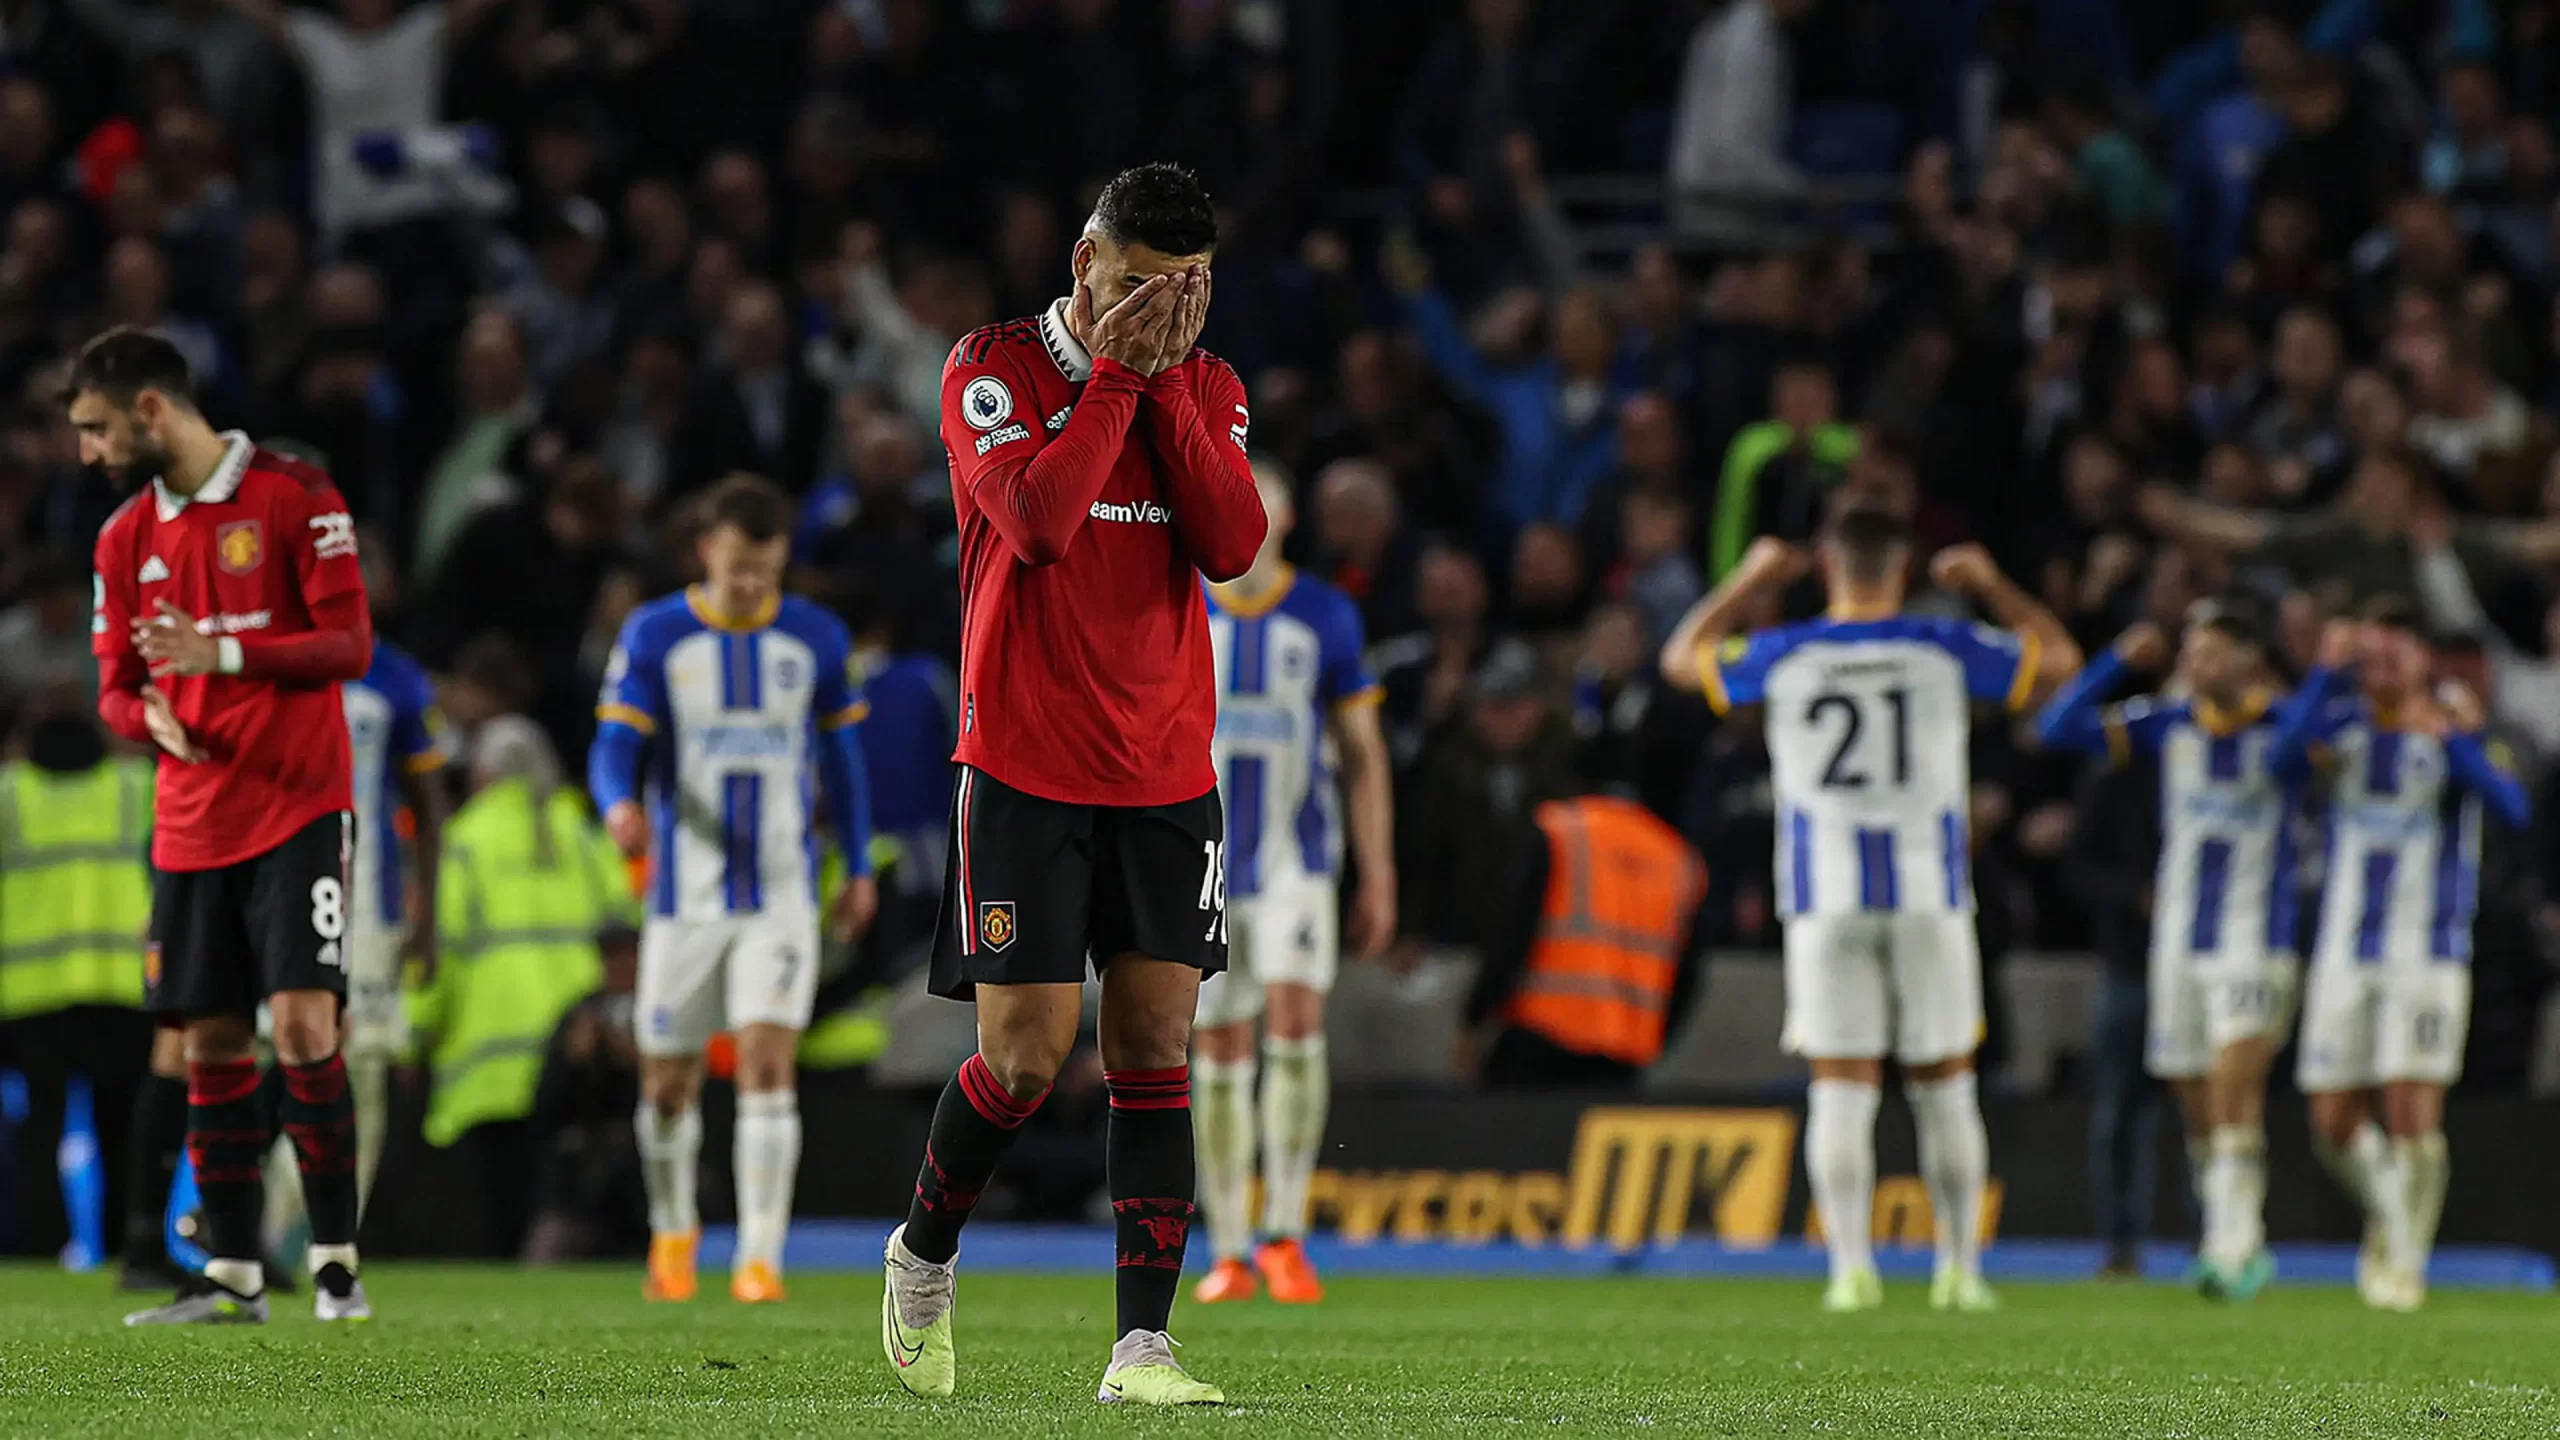 Brighton players attacked for celebrating win on Manchester United